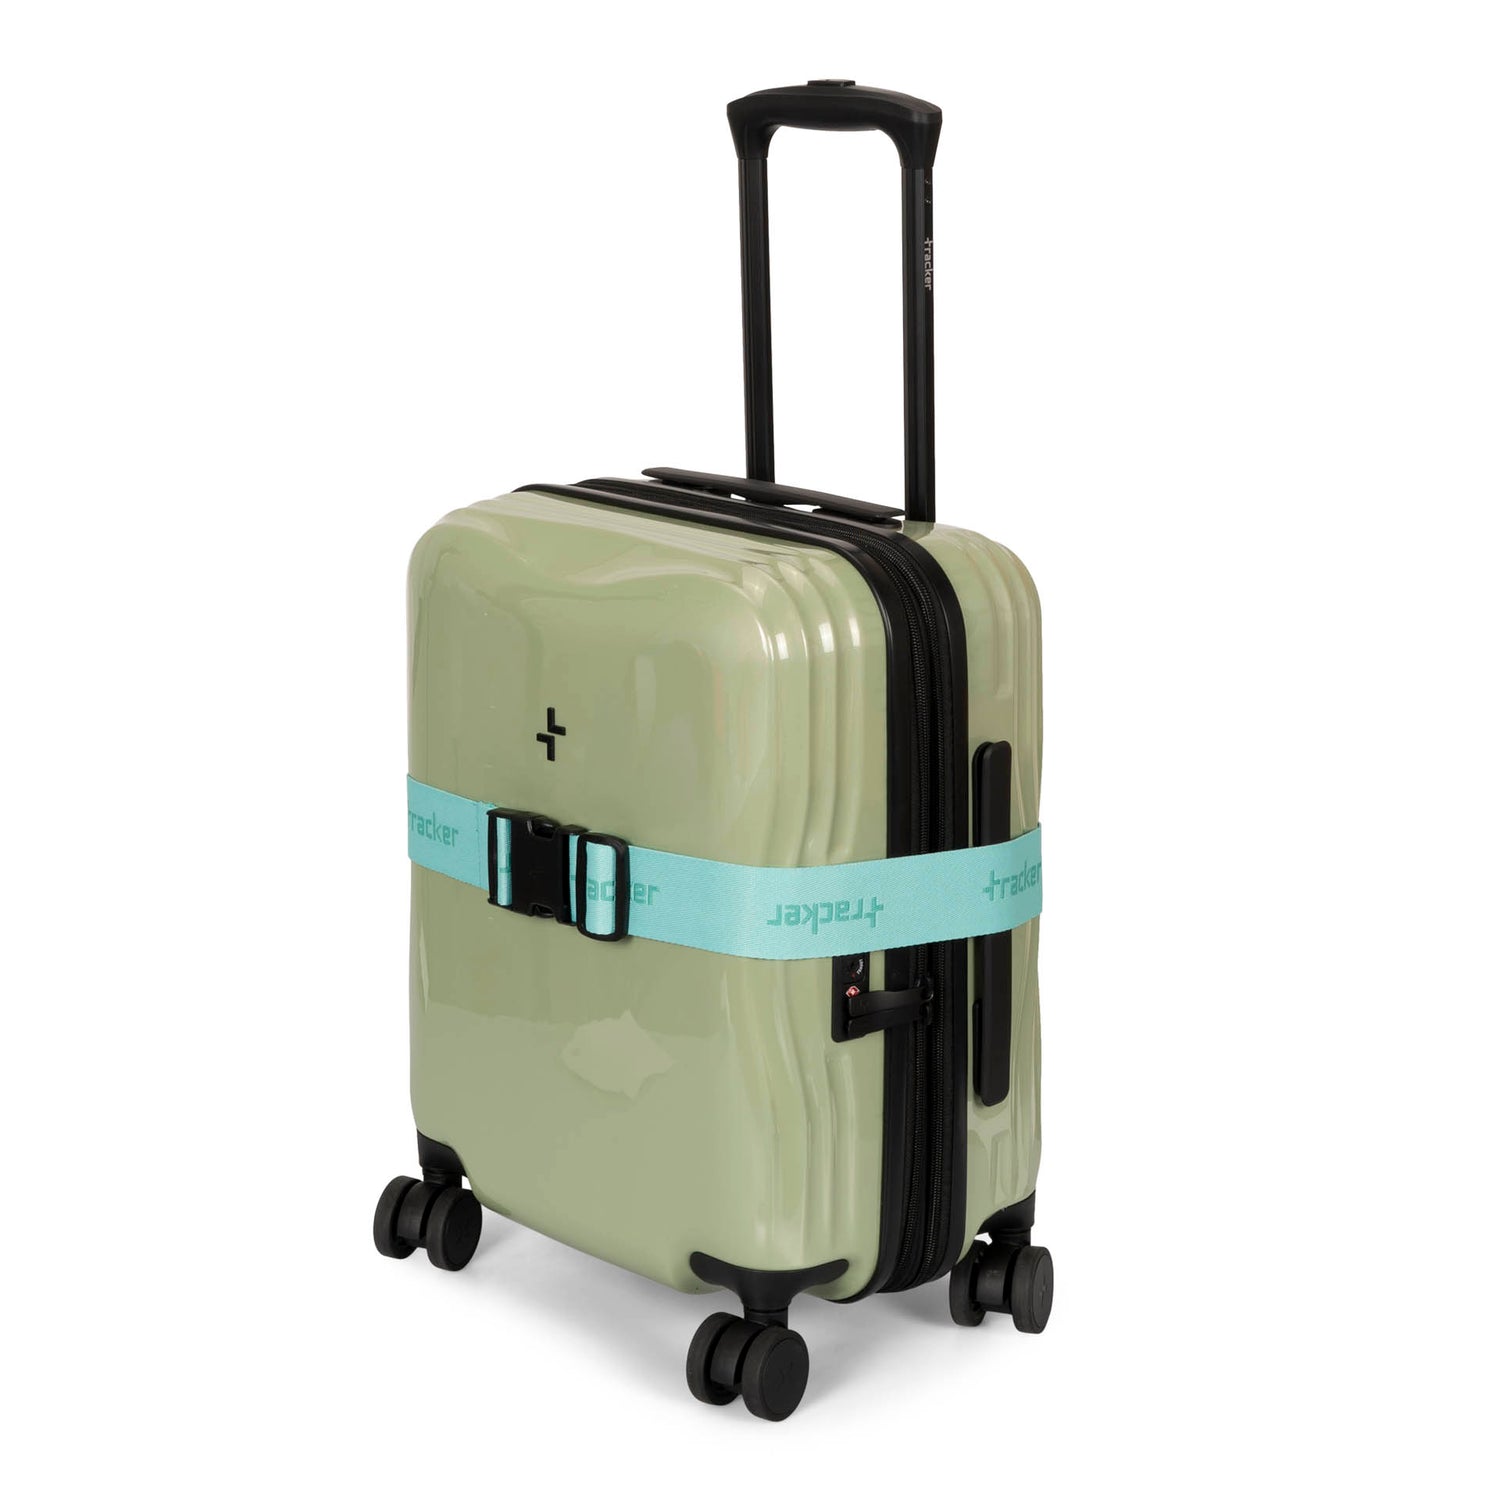 Teal luggage strap designed by Tracker called Tracker Logo wrapped around a luggage (that has its telescopic handle opened) and buckled showing the tracker logo pattern printed on the entirety of the polyester.